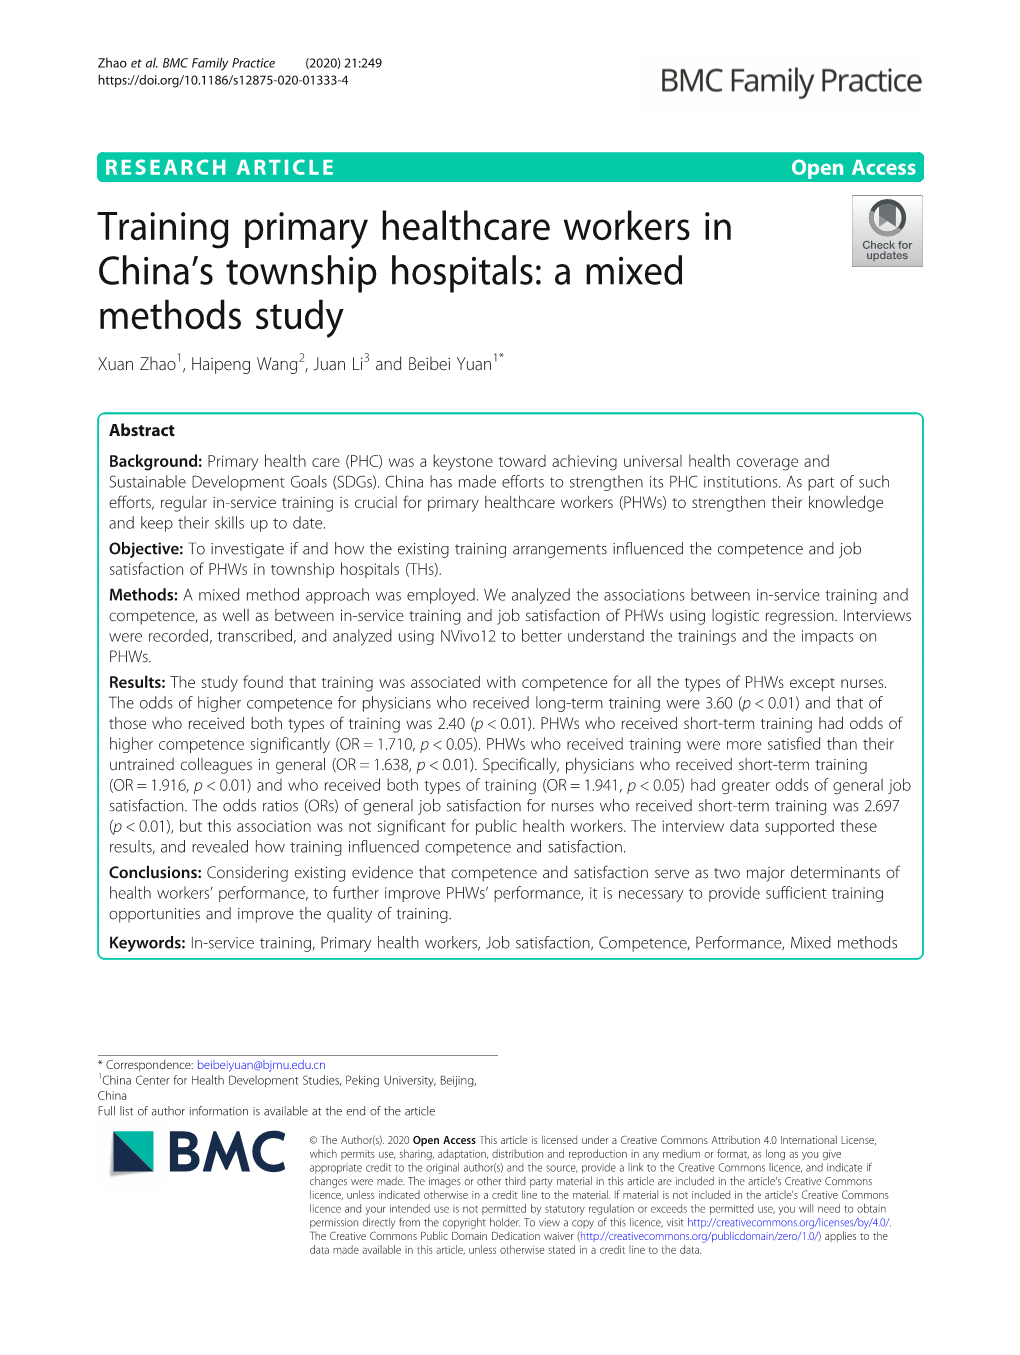 Training Primary Healthcare Workers in China's